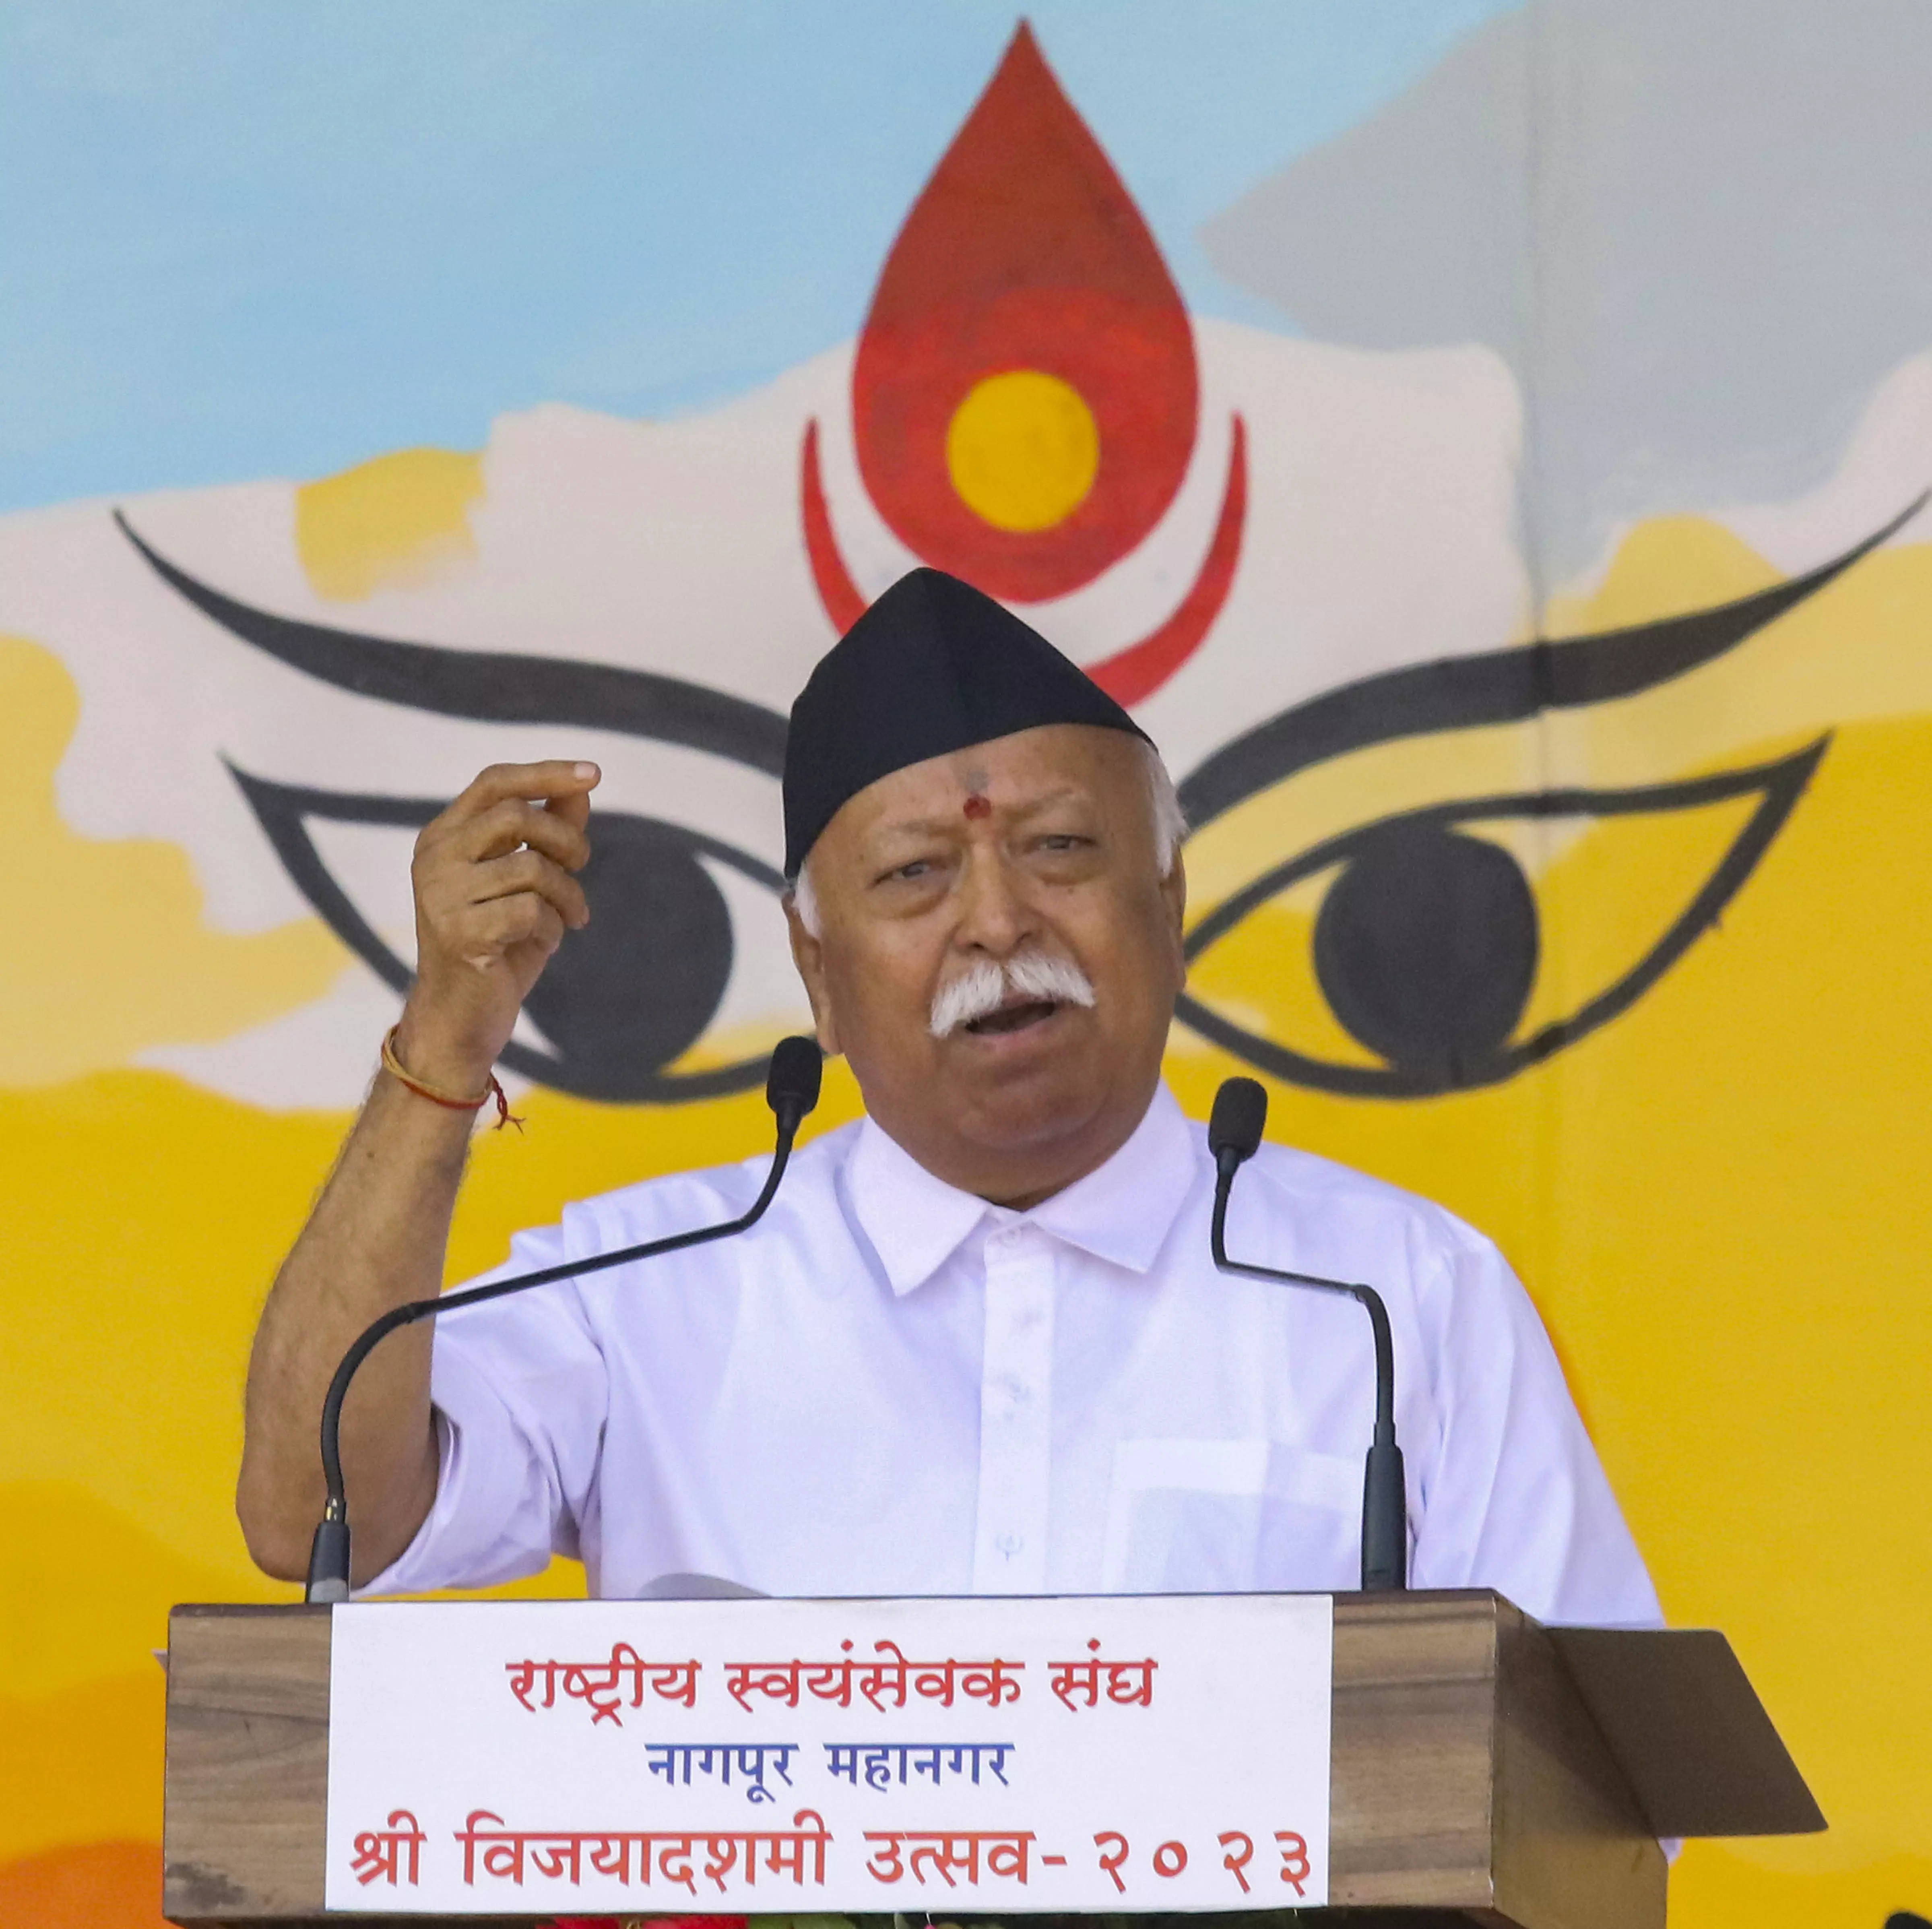 Mohan Bhagwat calls for unity, non-violence and harmony